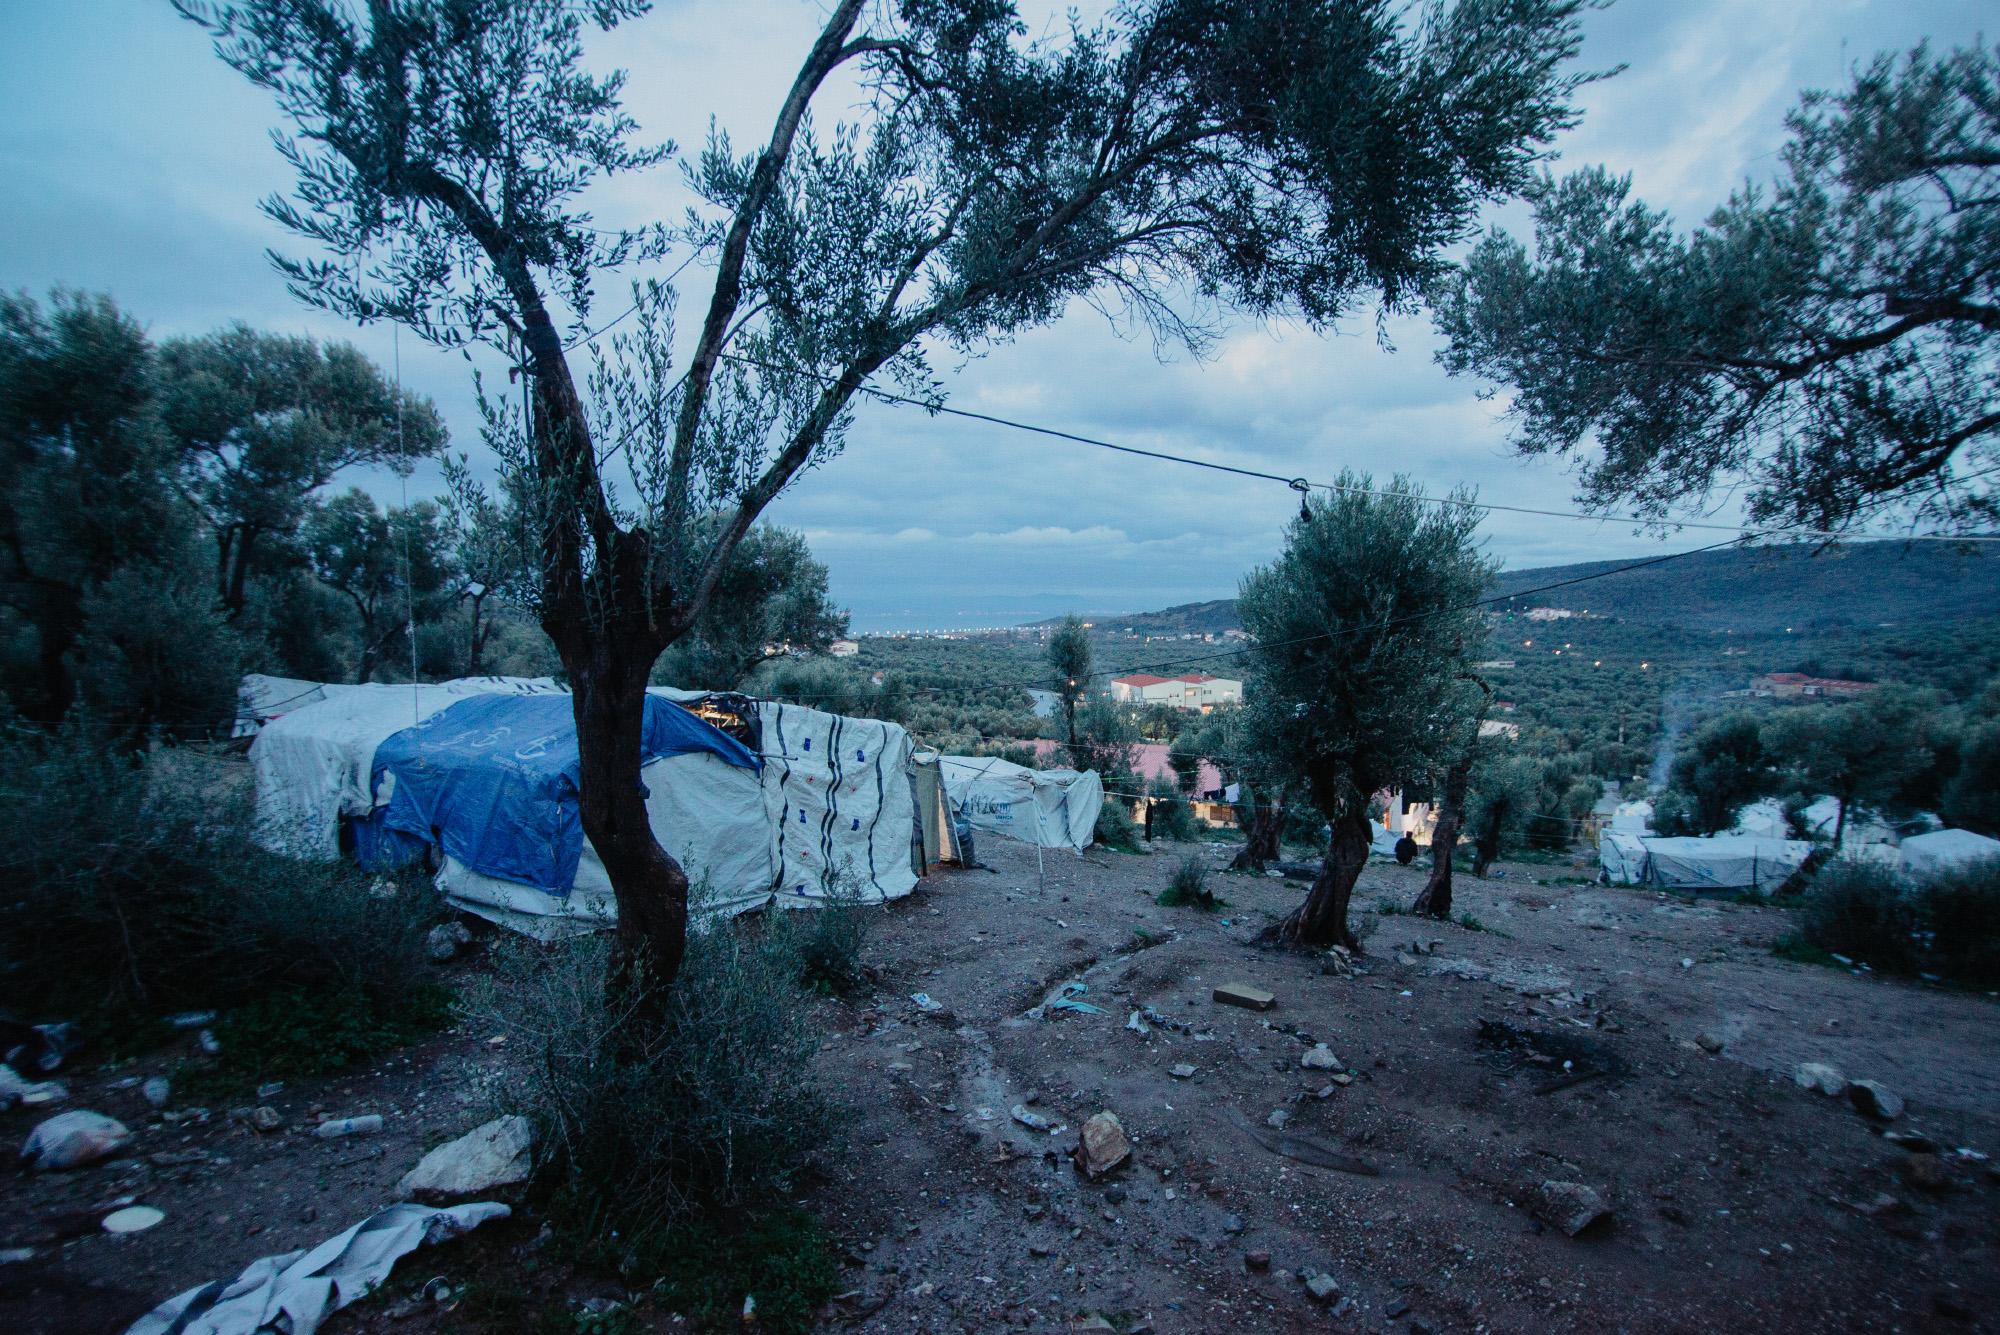 The Olive Grove - The view of the Olive Grove and Mitilini at dusk. 2019.